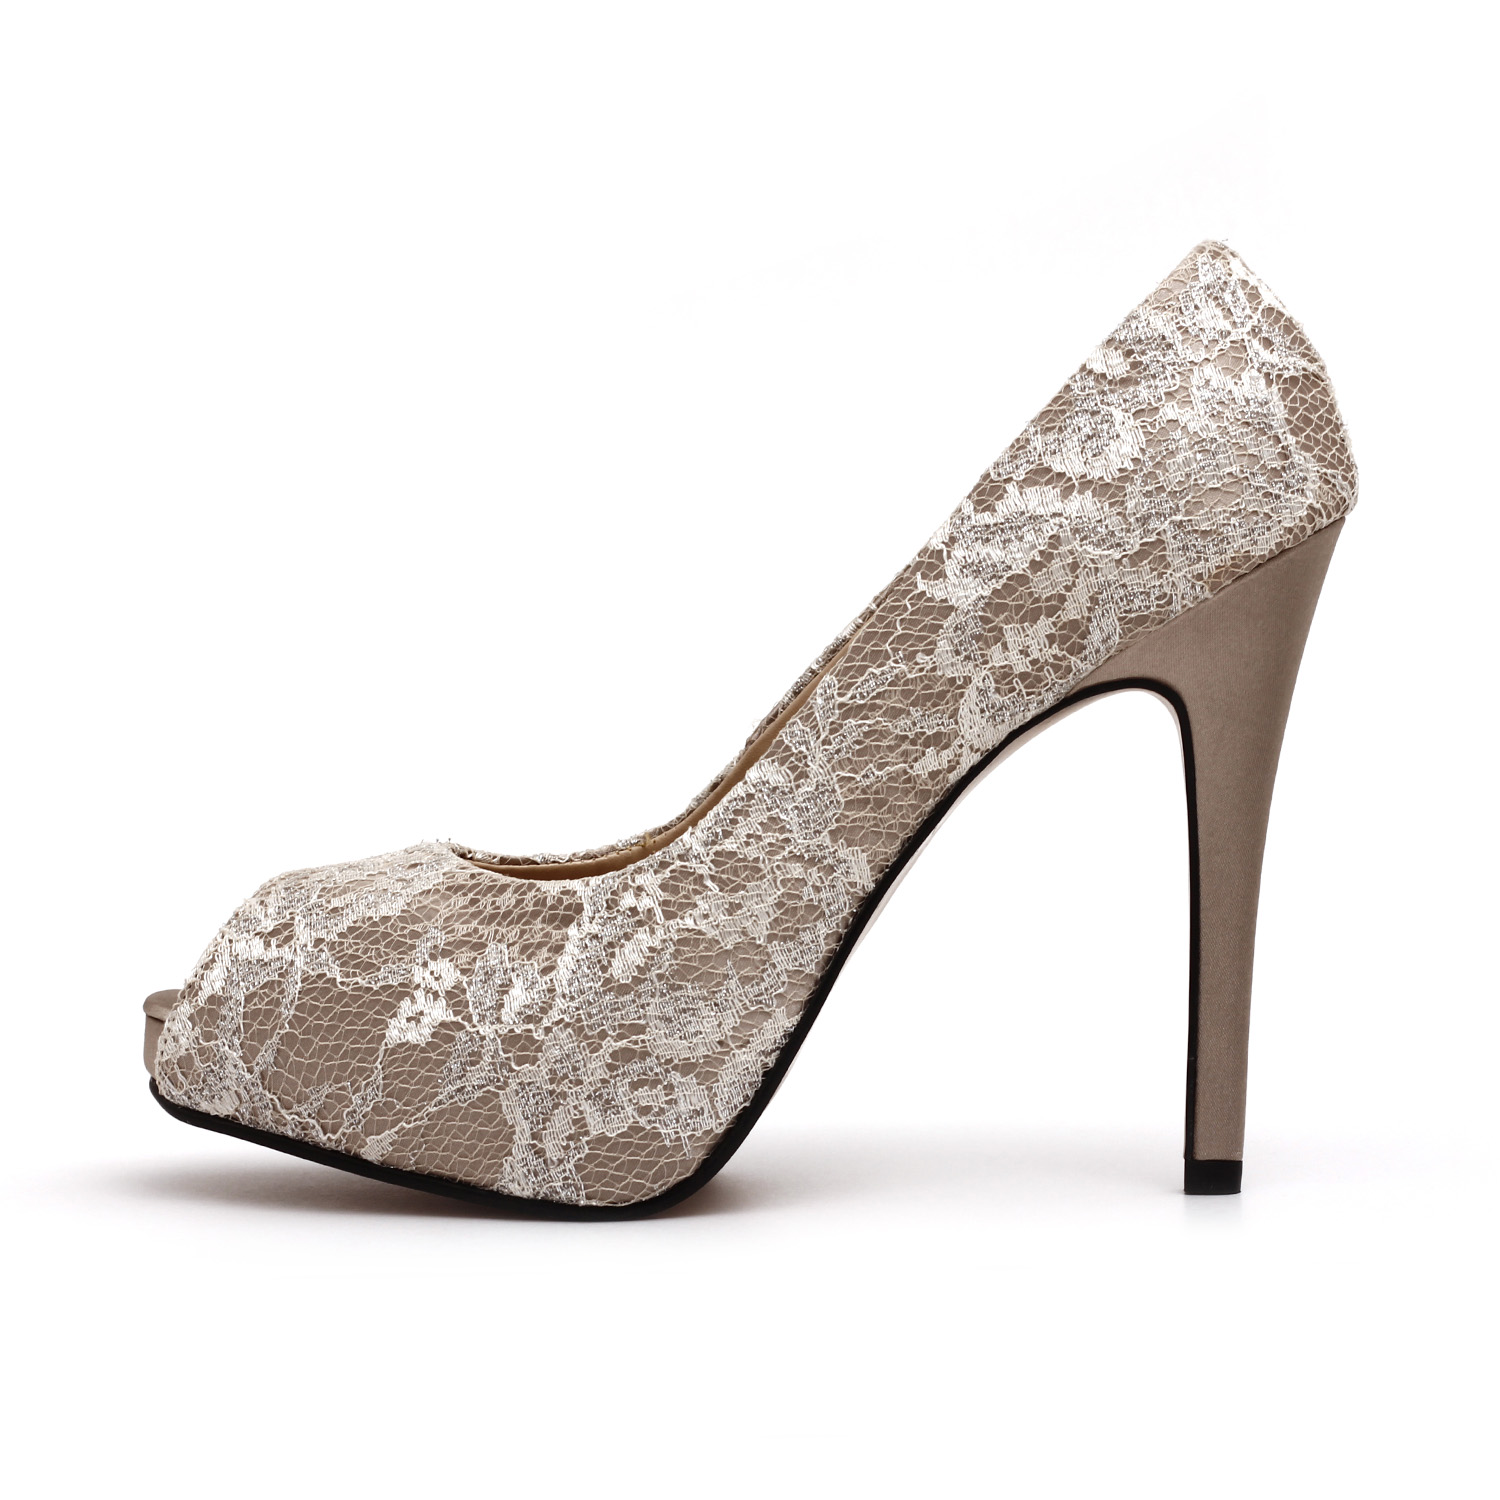 champagne colored bridal shoes